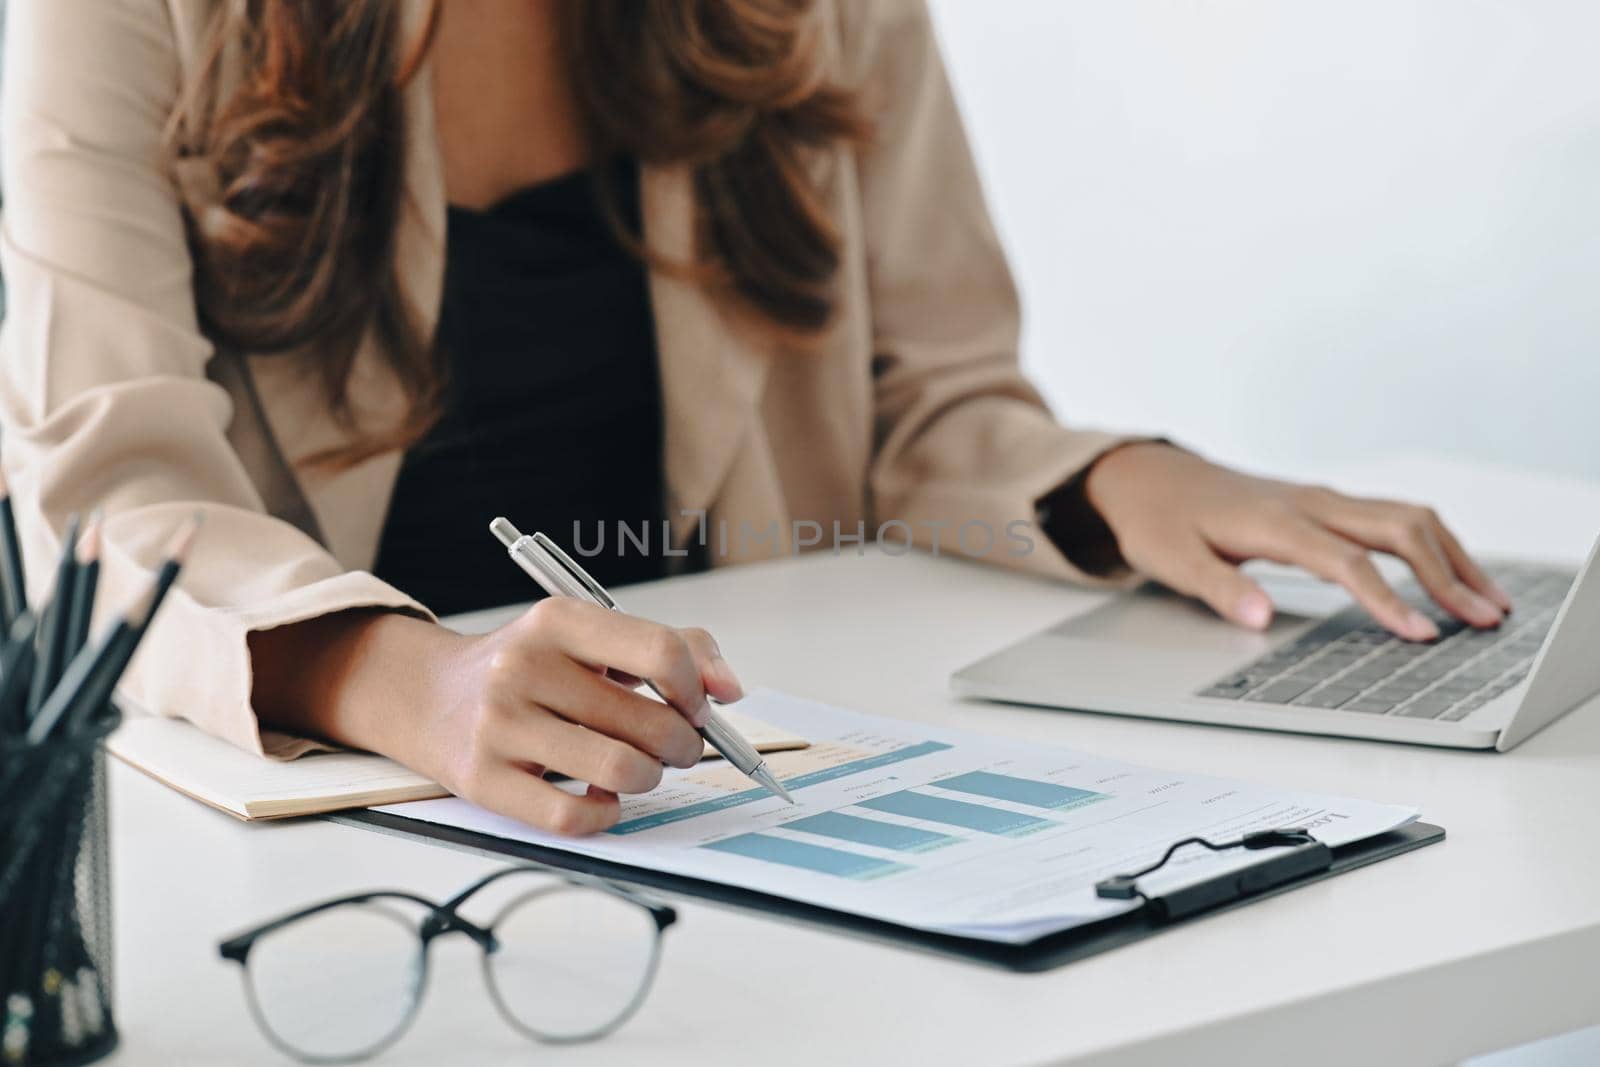 Businesswoman typing on laptop and writing information on document.